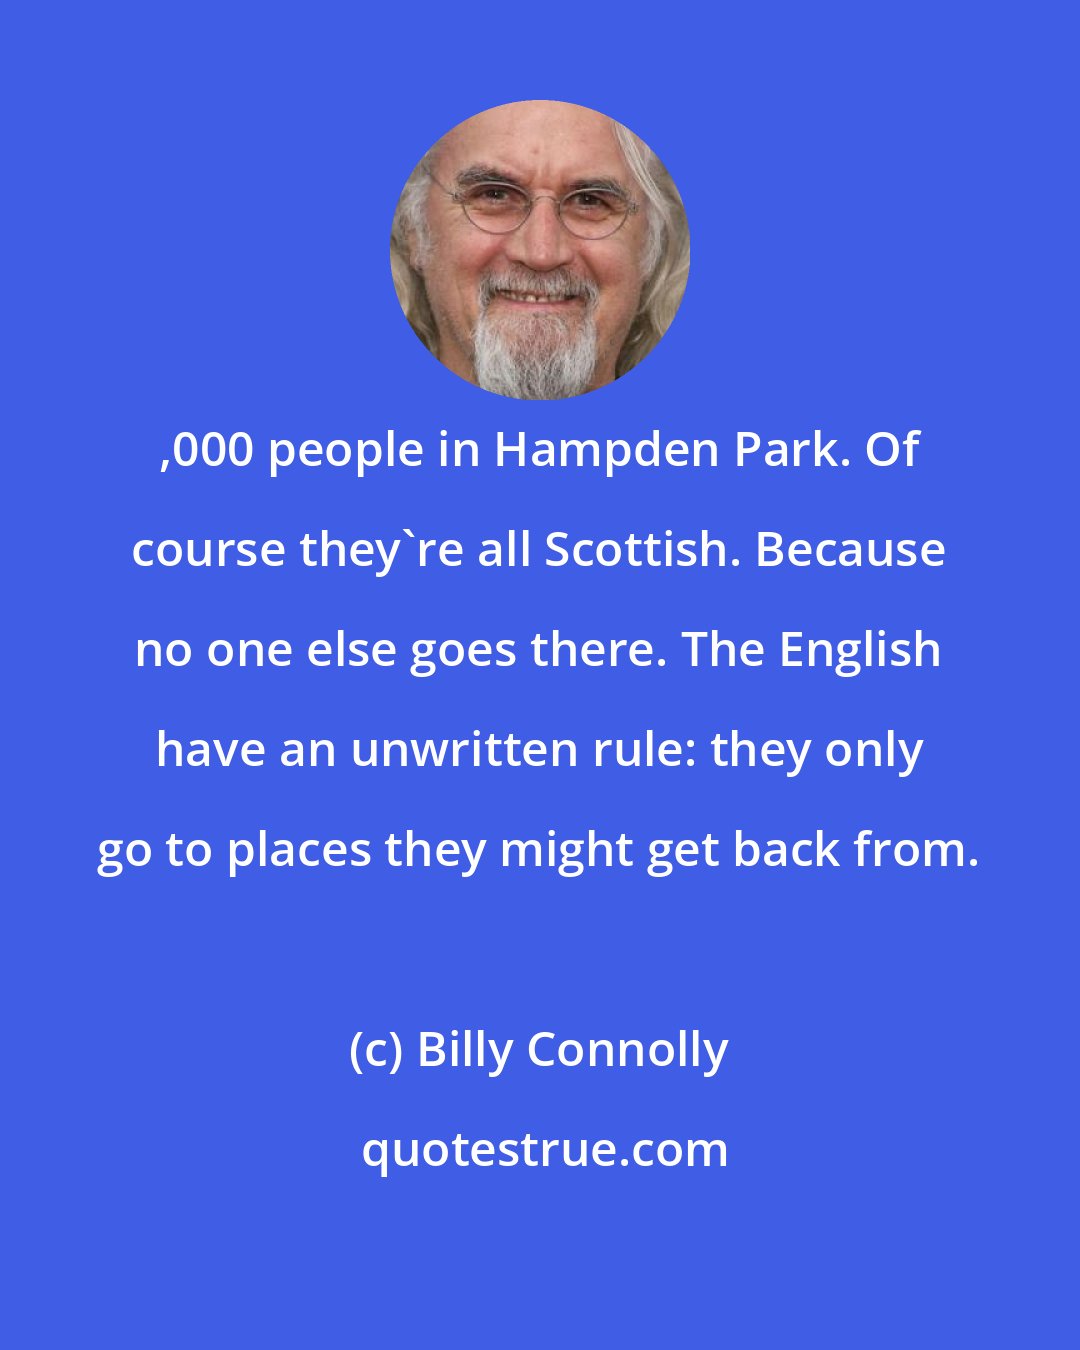 Billy Connolly: ,000 people in Hampden Park. Of course they're all Scottish. Because no one else goes there. The English have an unwritten rule: they only go to places they might get back from.